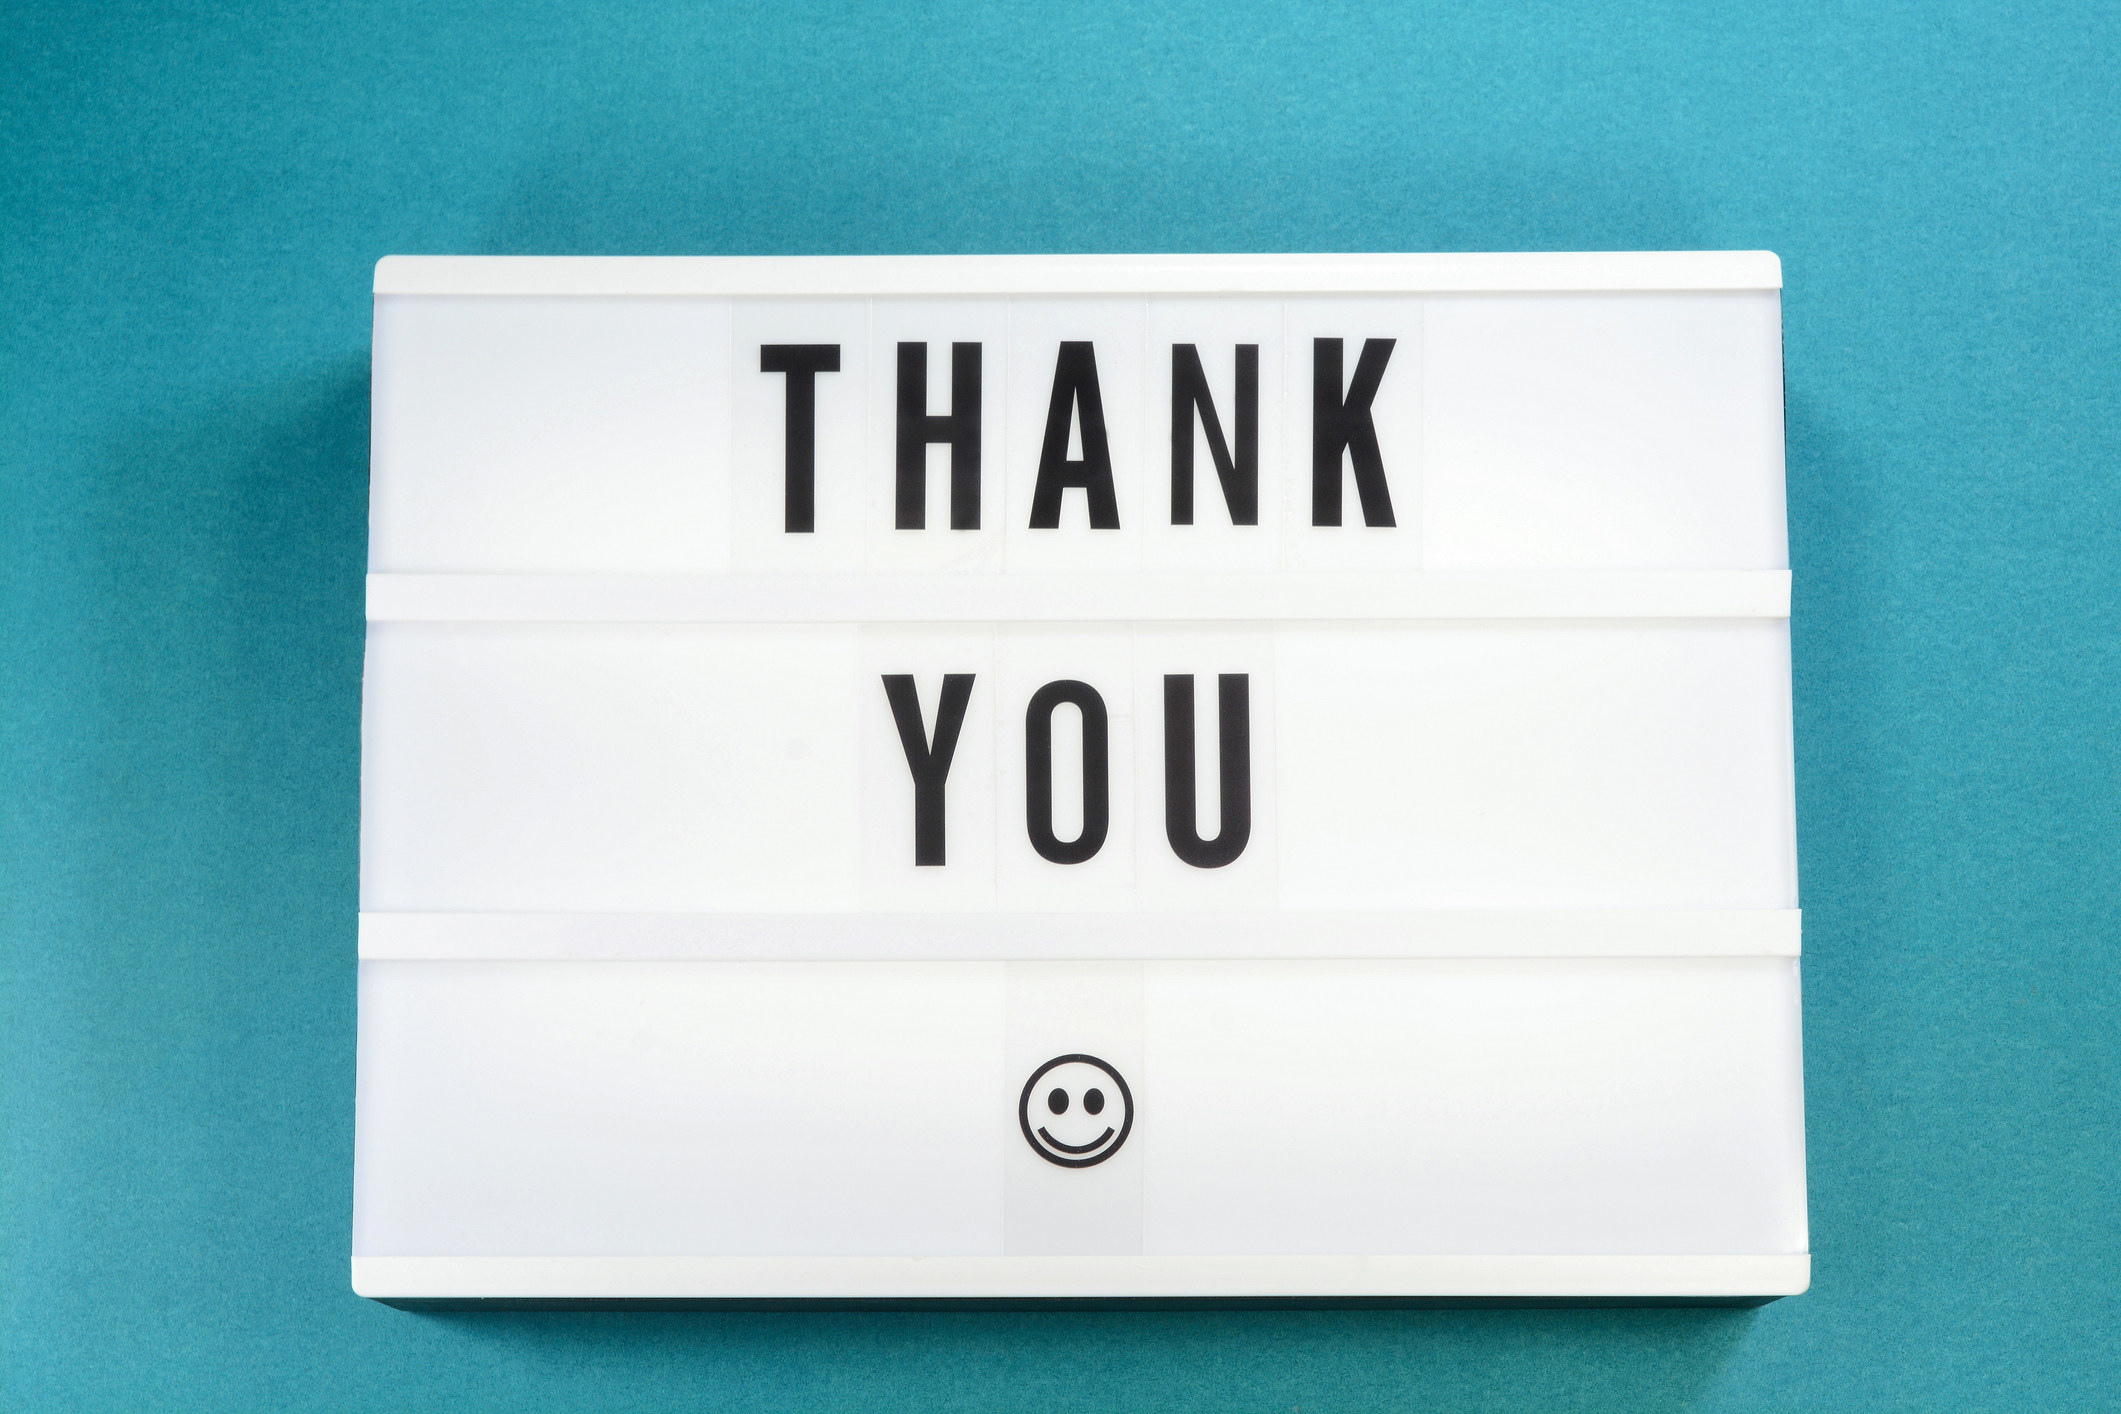 The word &quot;Thank you&quot; arranged in a light box